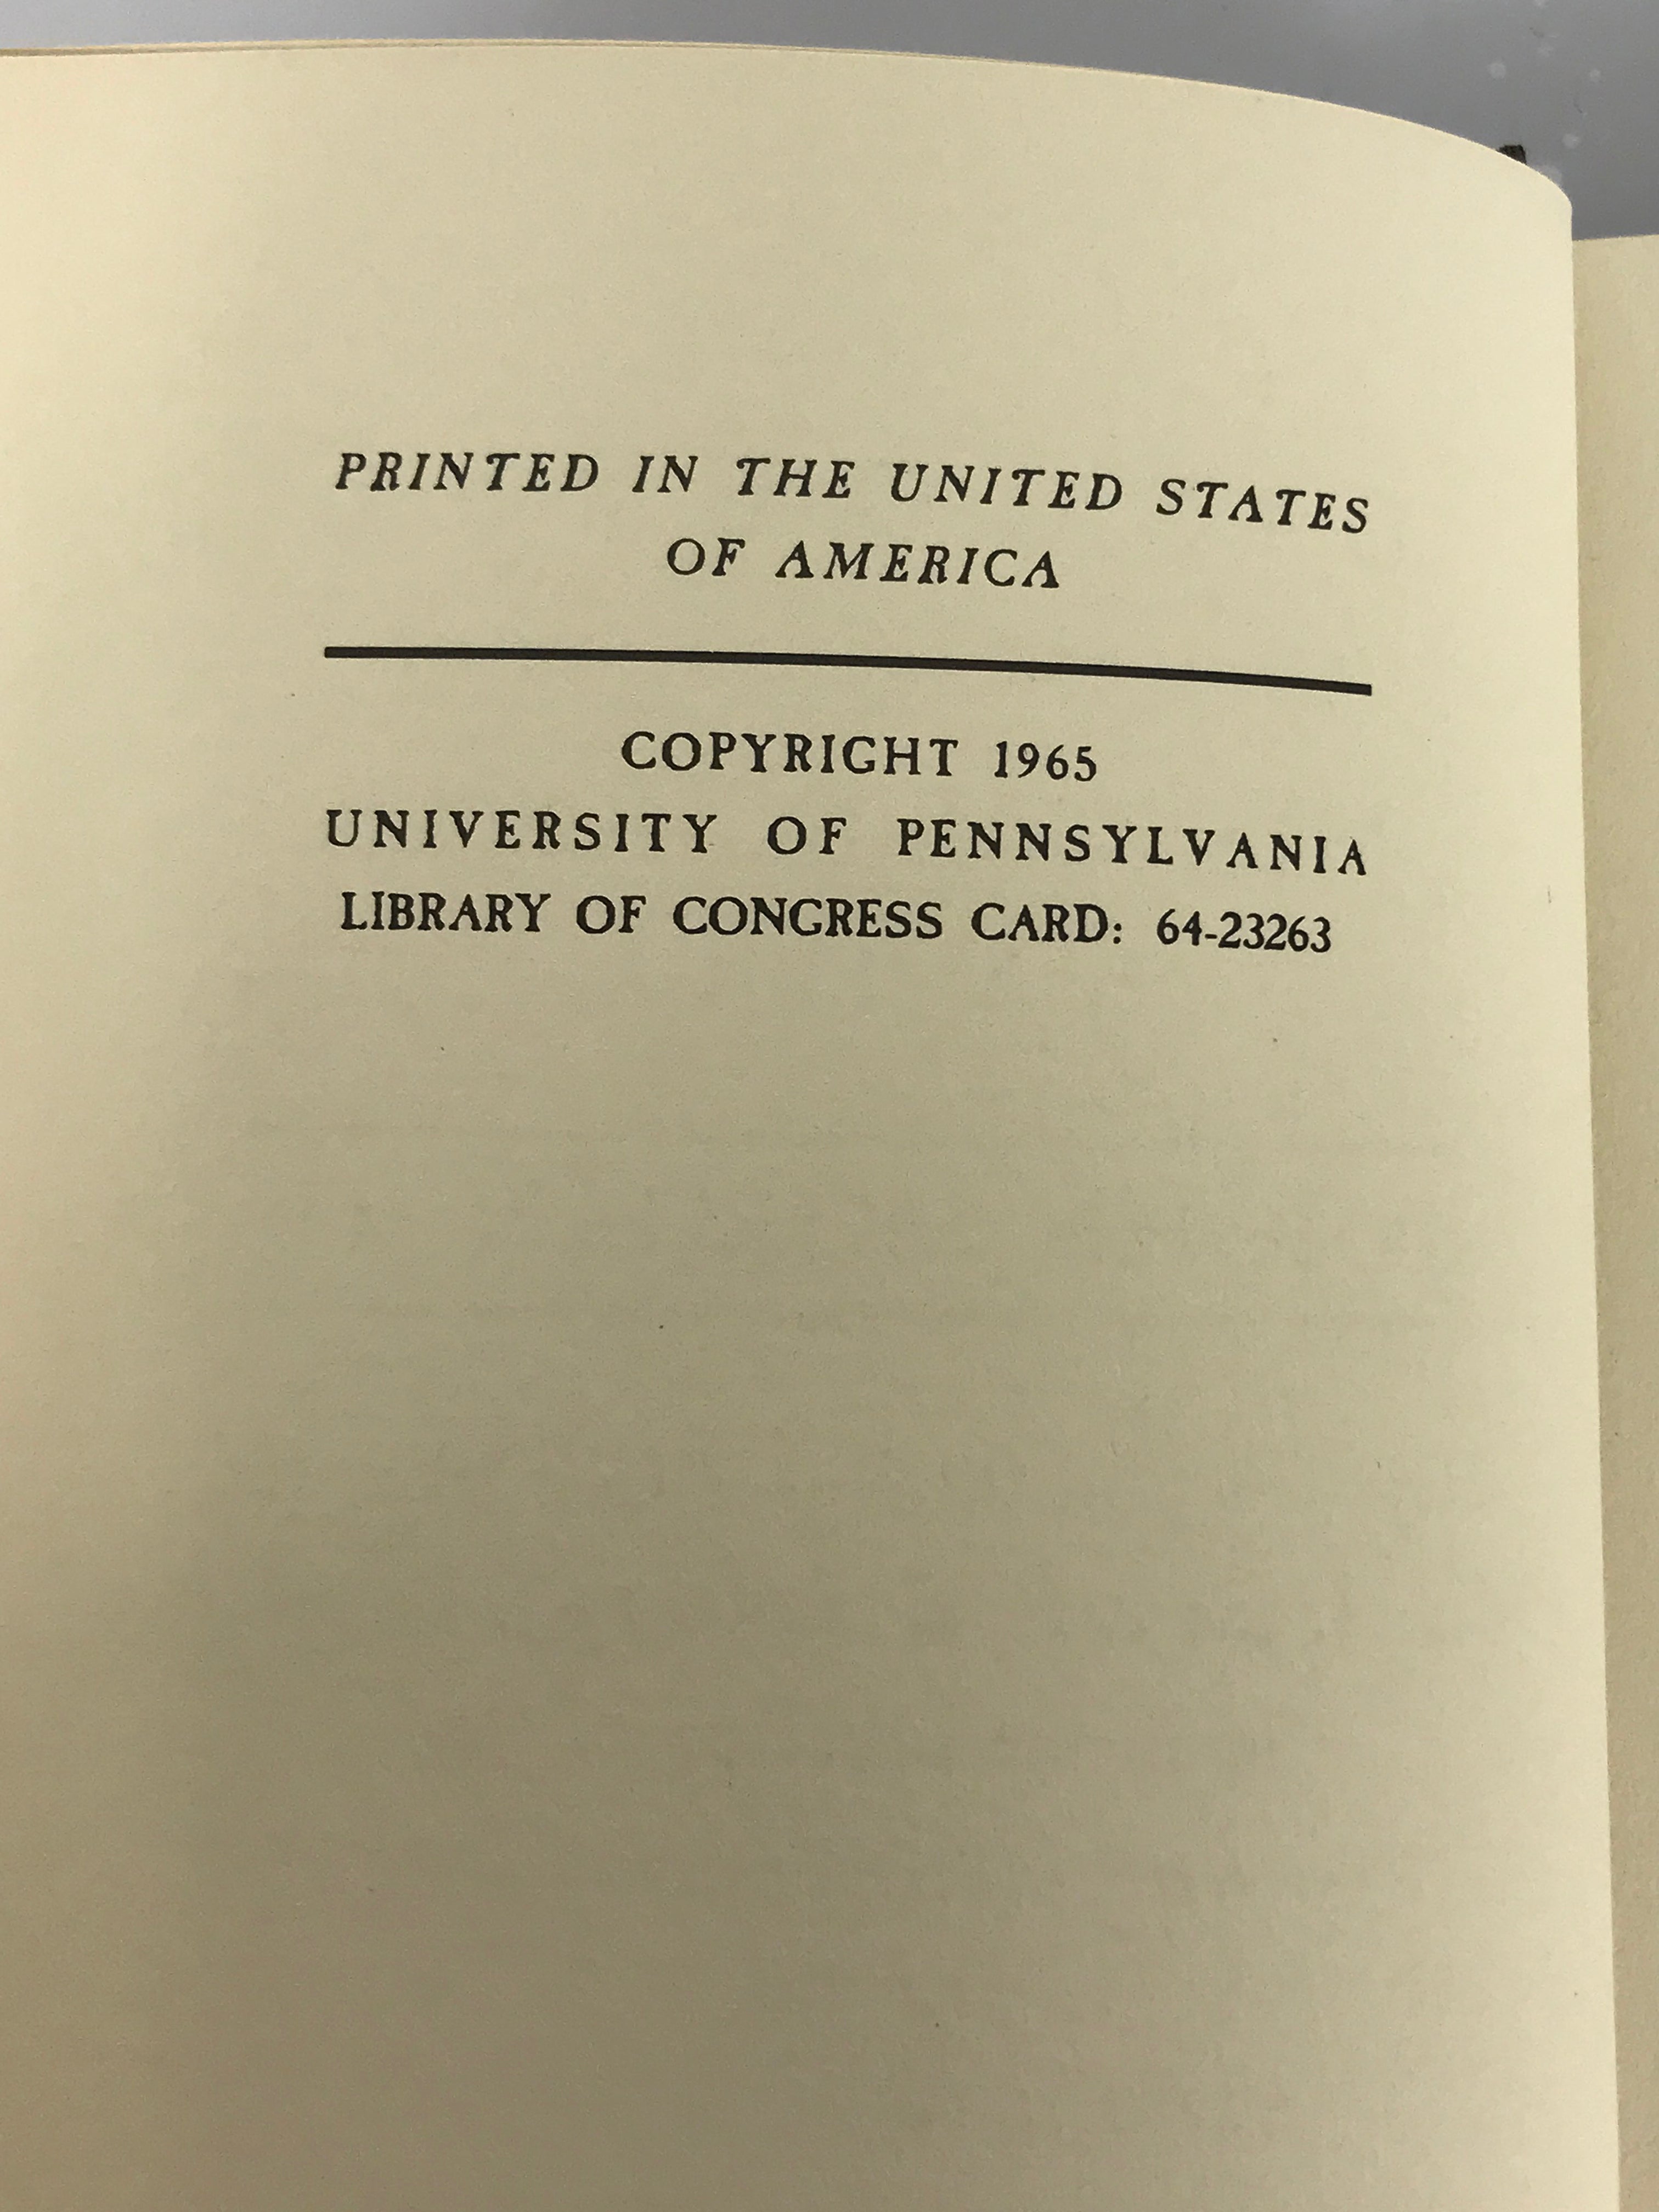 Dr. Morgan's Discourse Upon the Institution of Medical Schools in America 1965